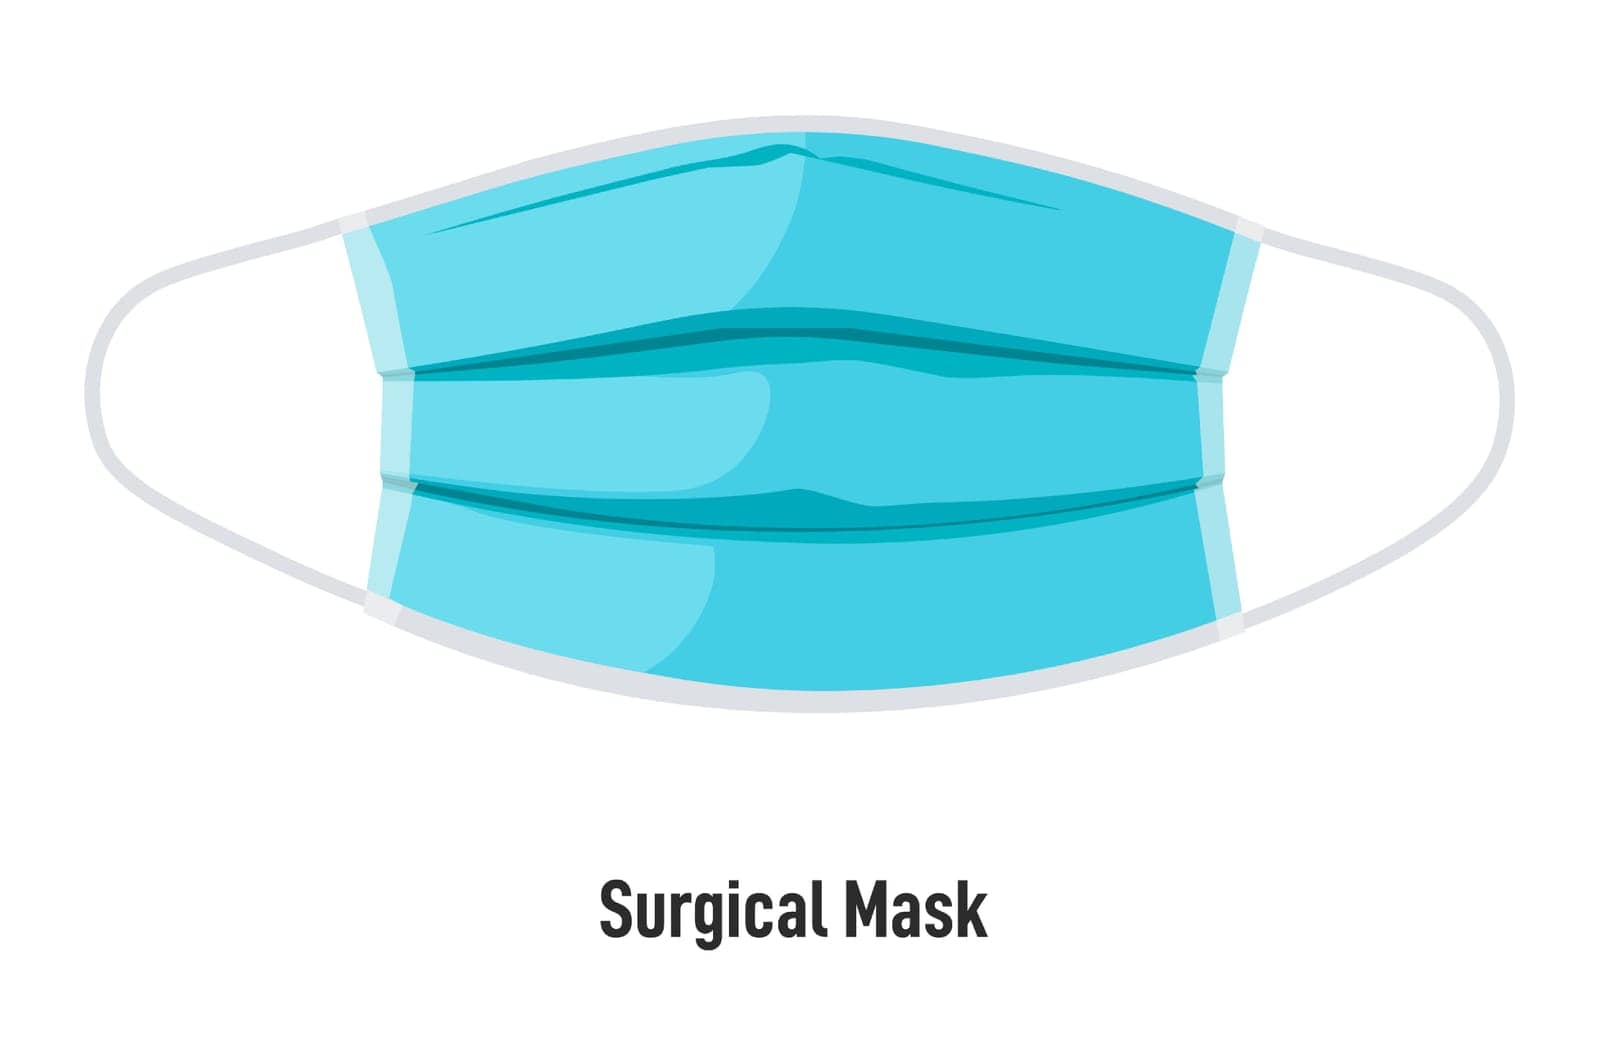 Surgical mask protecting from pandemic corona by Sonulkaster